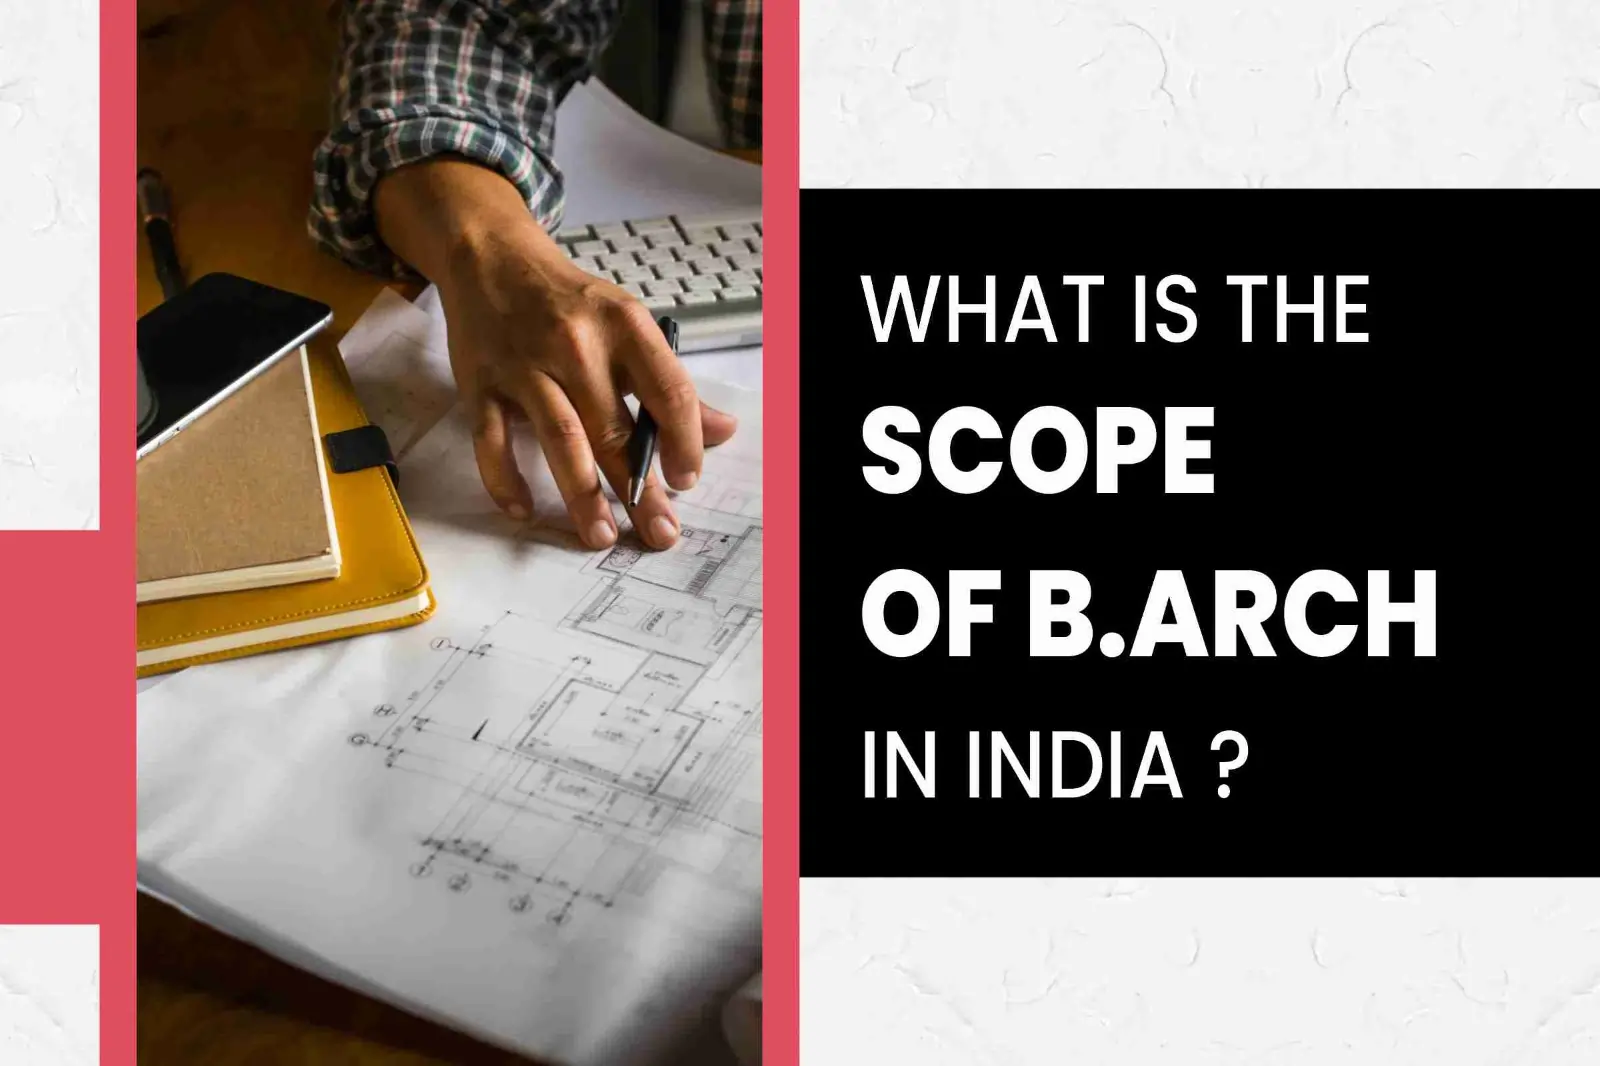 Scope of B.Arch in India